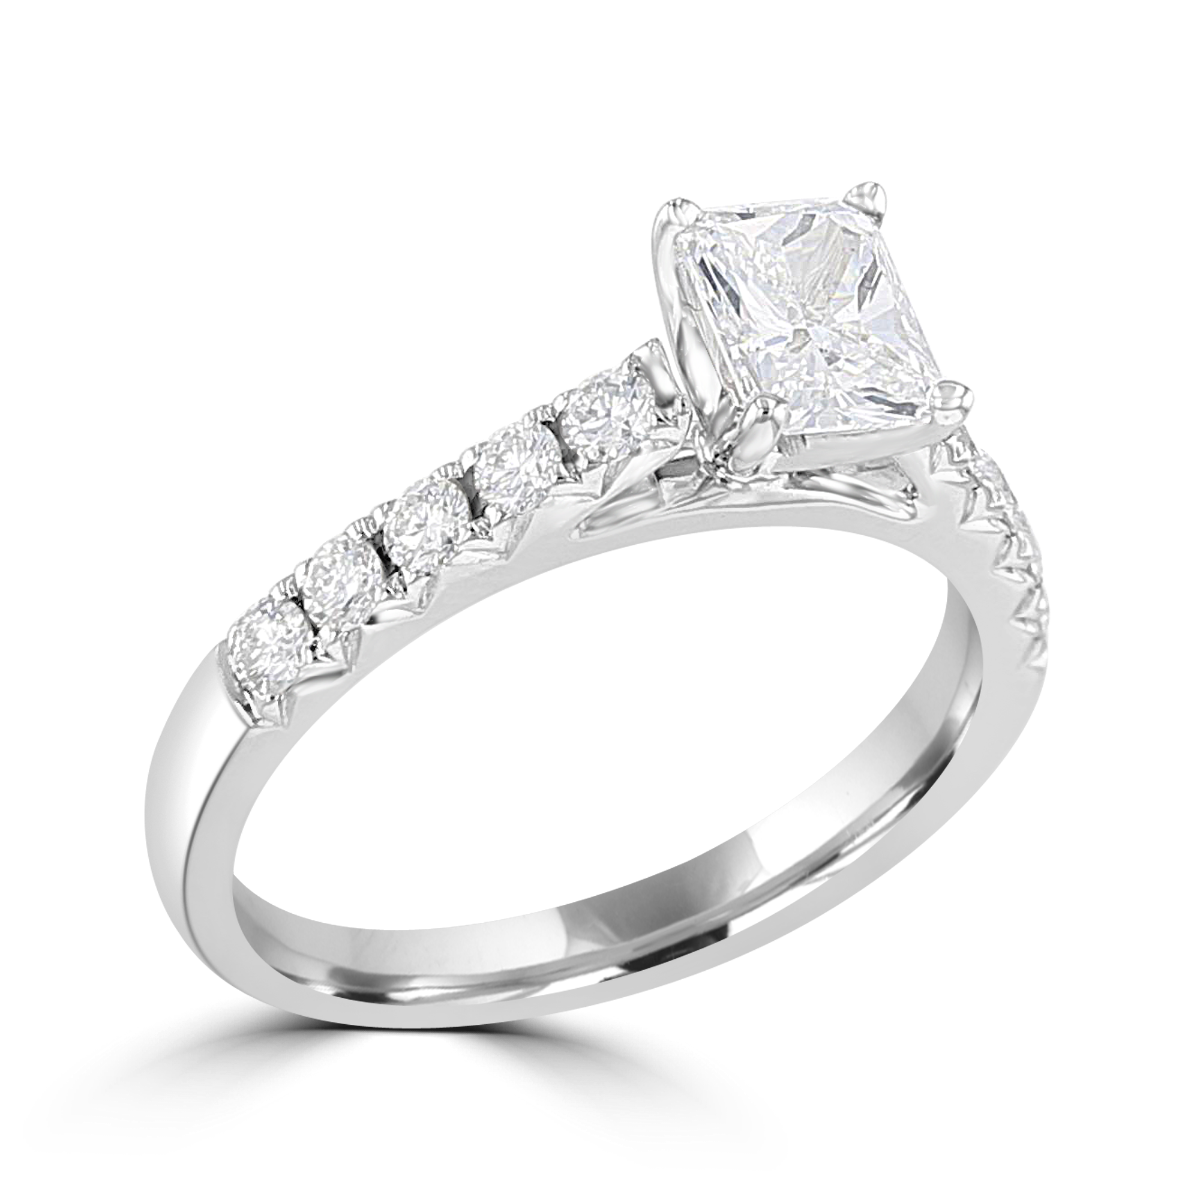 14KT White Gold 1 CTW Radiant Diamond Cathedral Ring 4,4.5,5,5.5,6,6.5,7,7.5,8,8.5,9